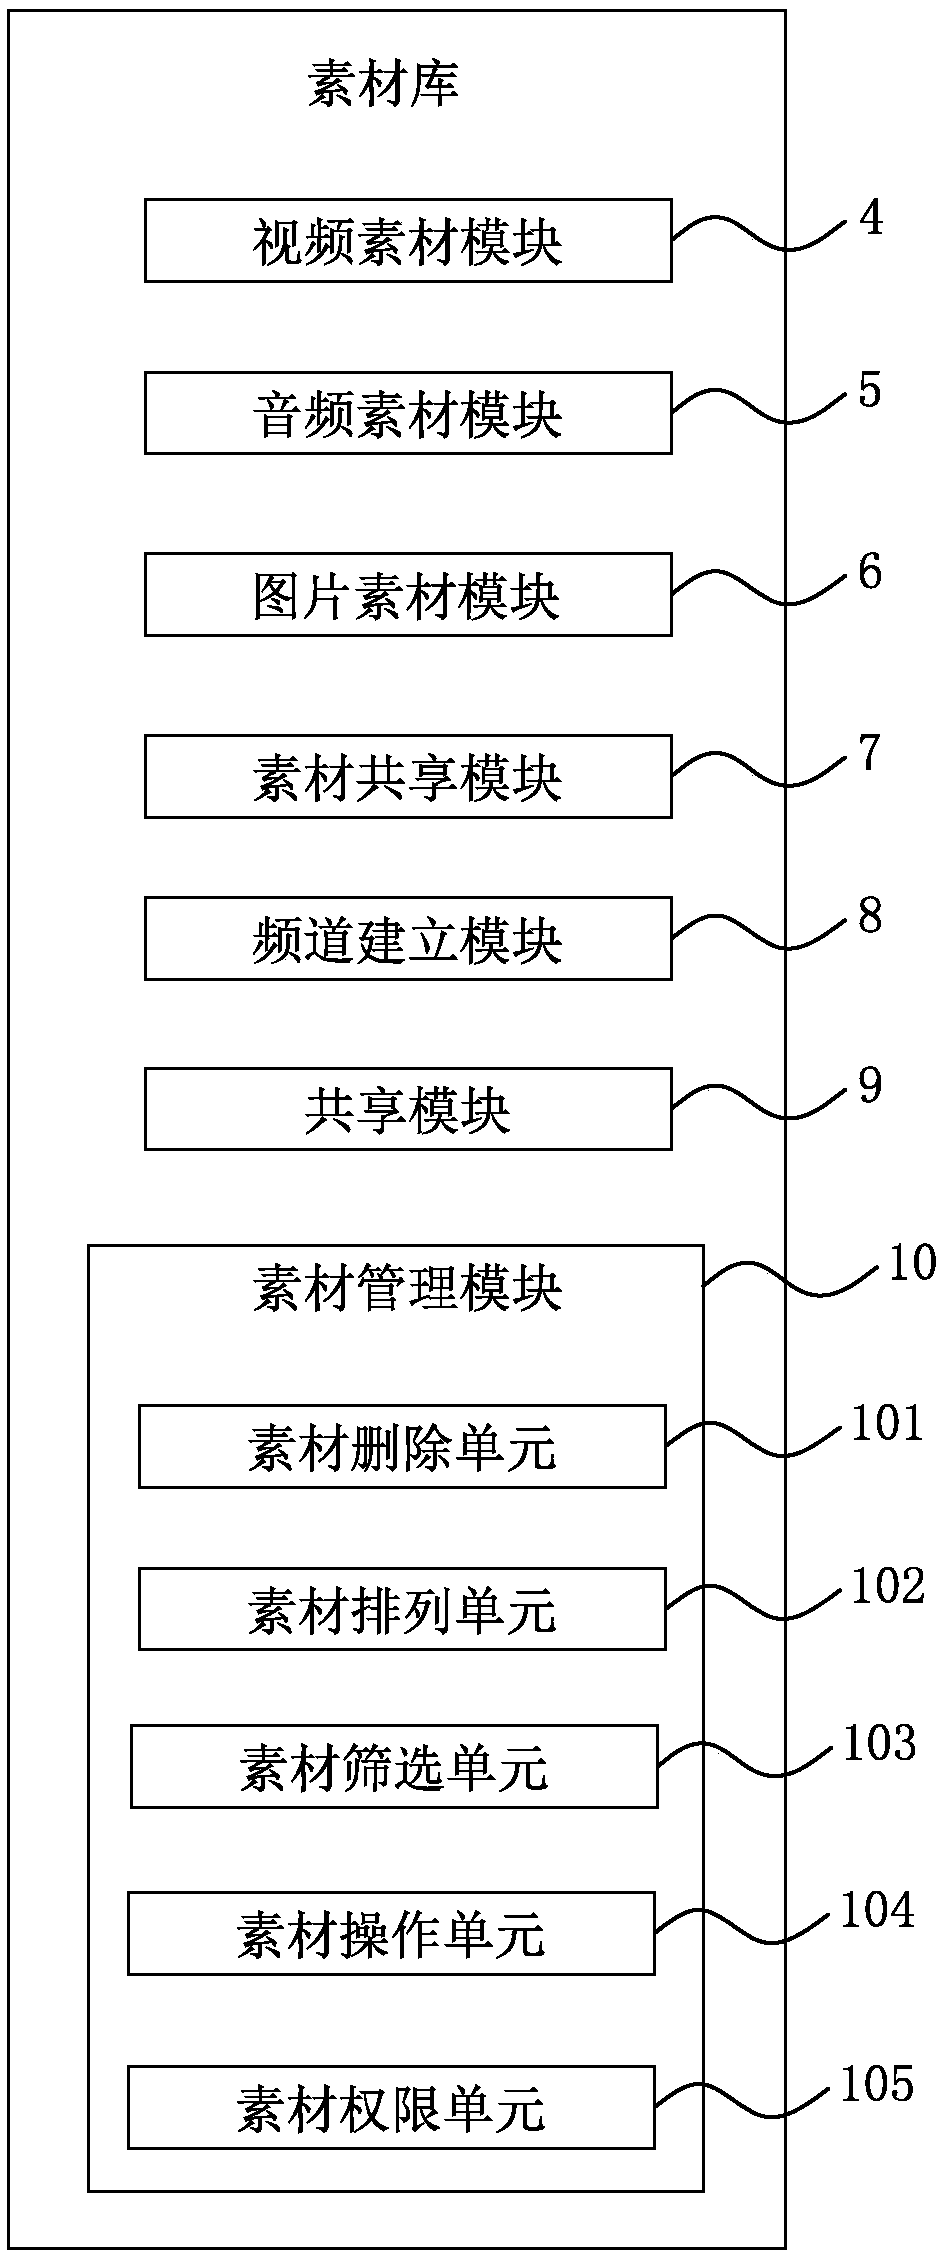 A cloud shear material library system and an implementation method thereof